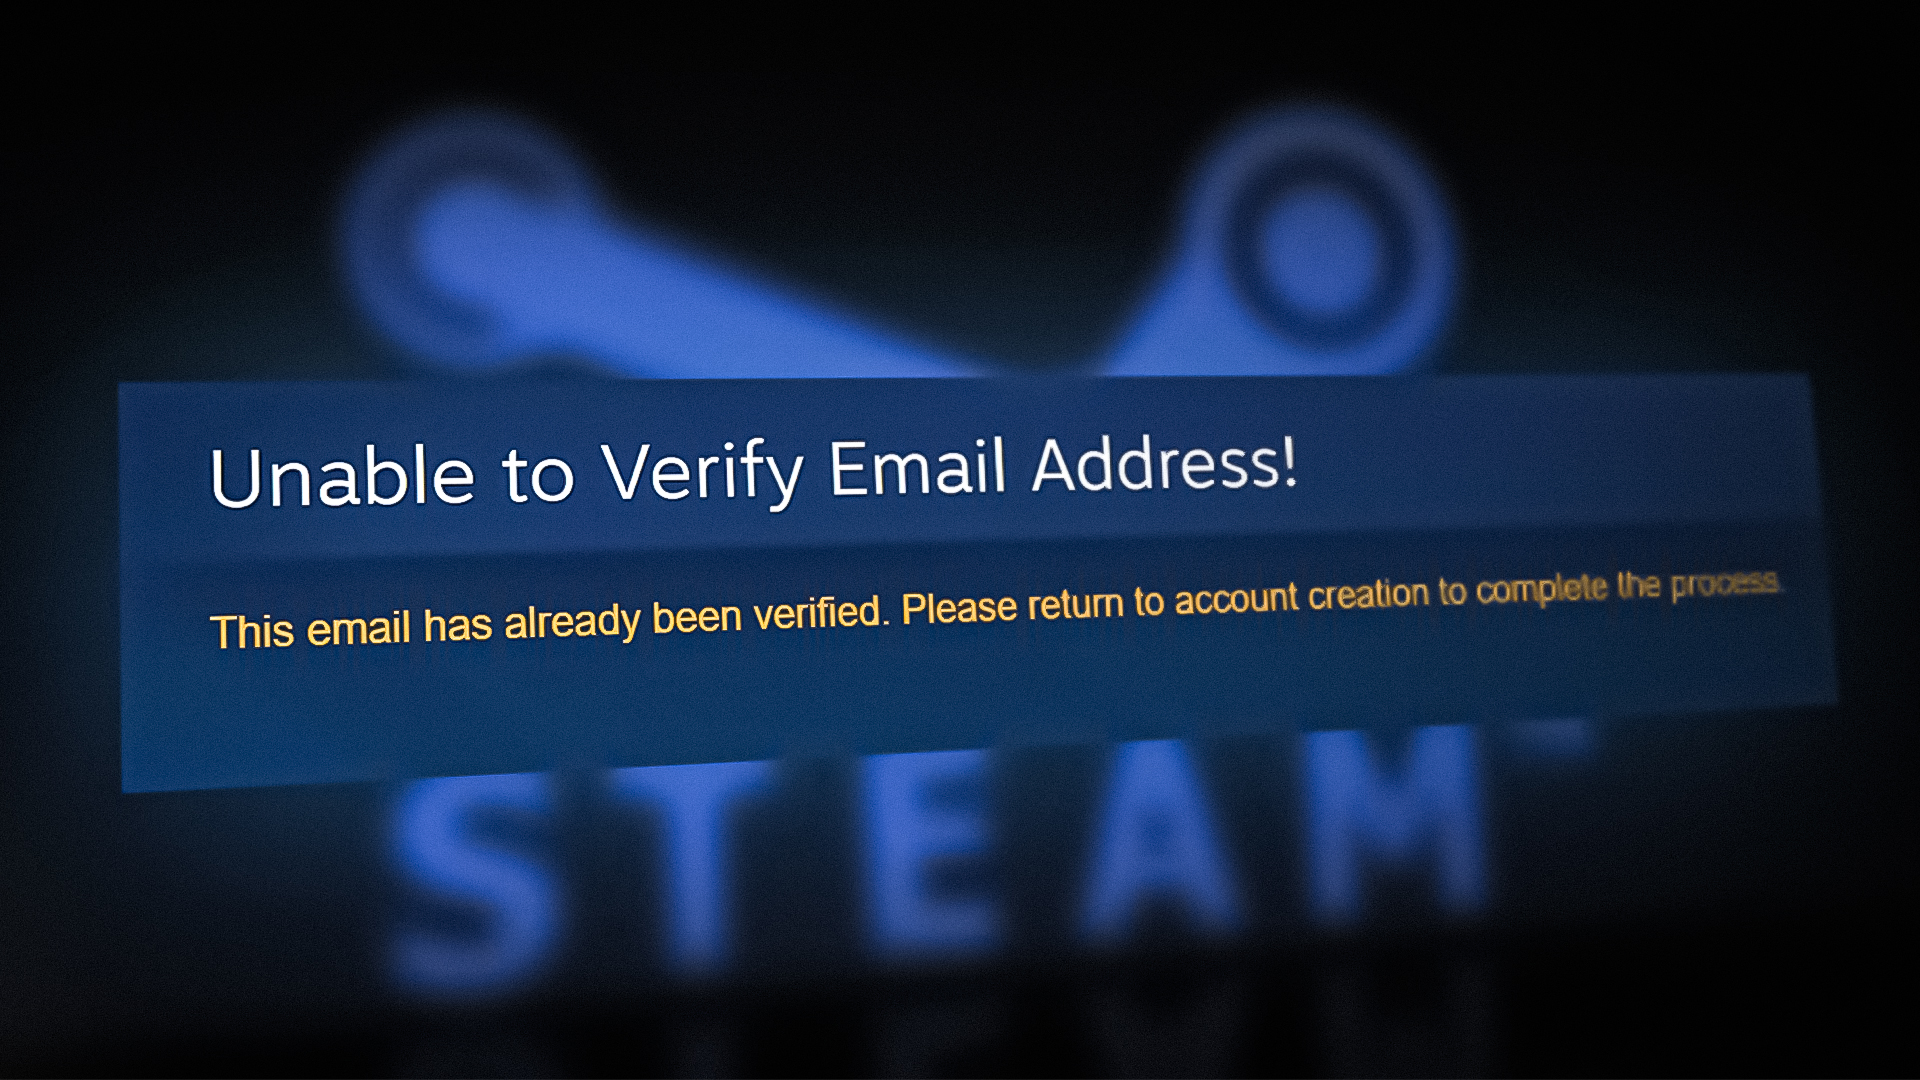 How To Fix “Unable To Verify Email Address In Steam” | Get All The Details